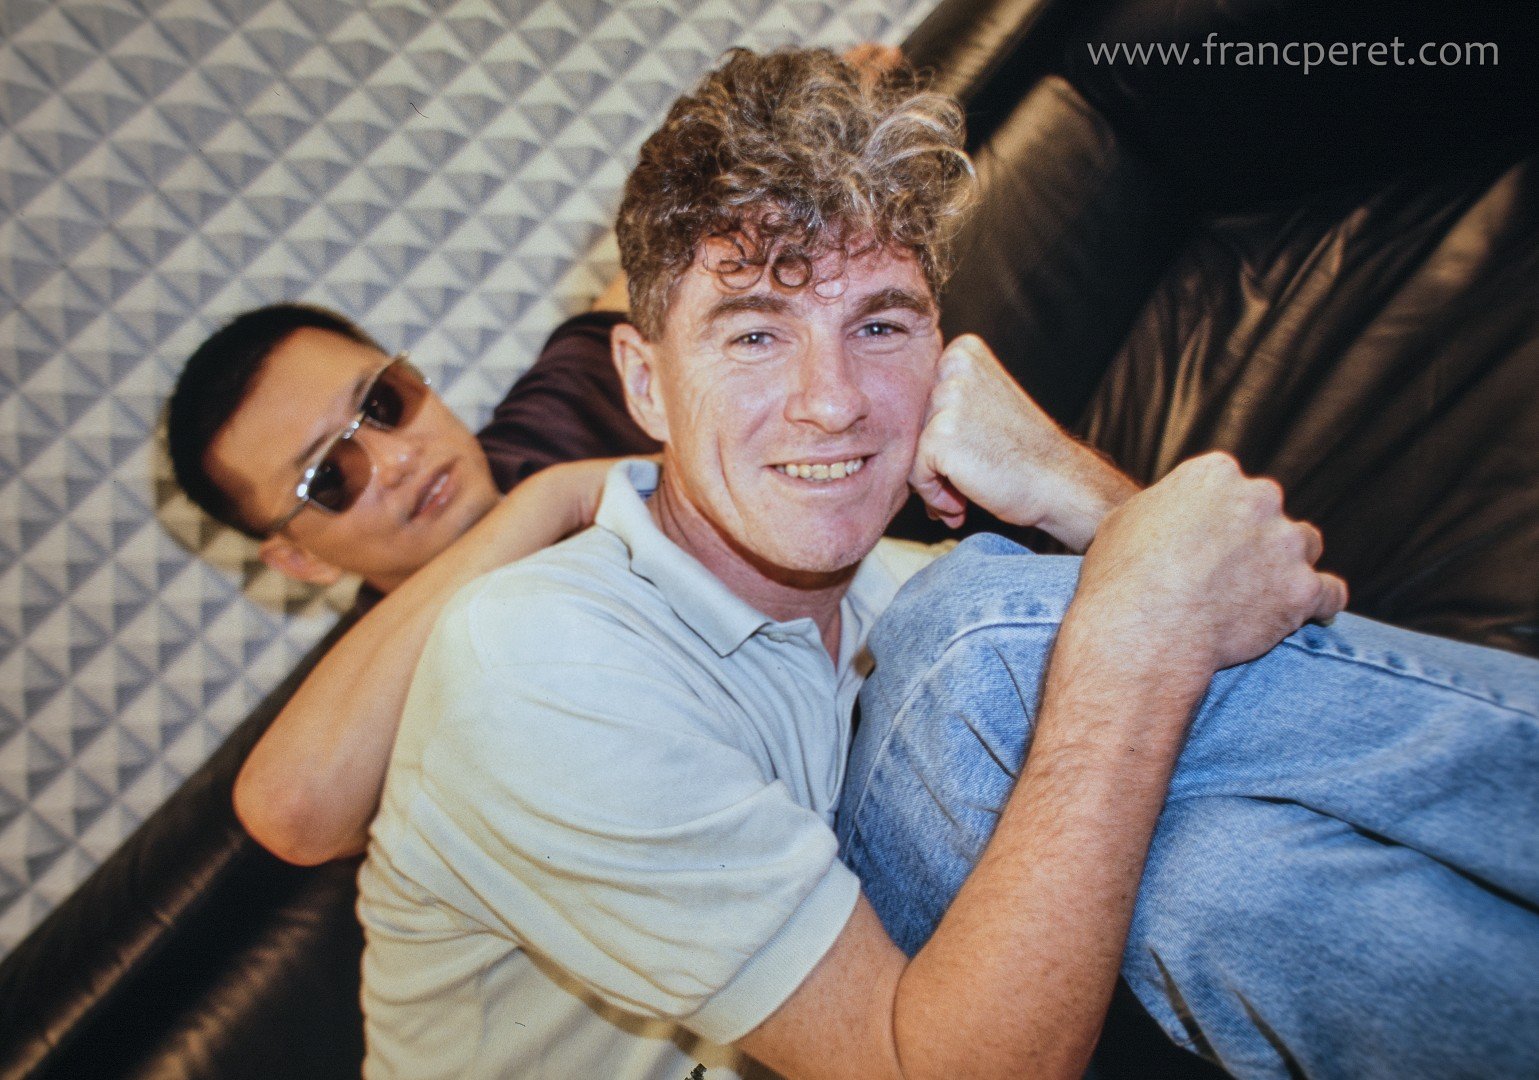 Casual and relaxed Christopher Doyle and Wang Kar Wai at the early stage of their fame in 1994.